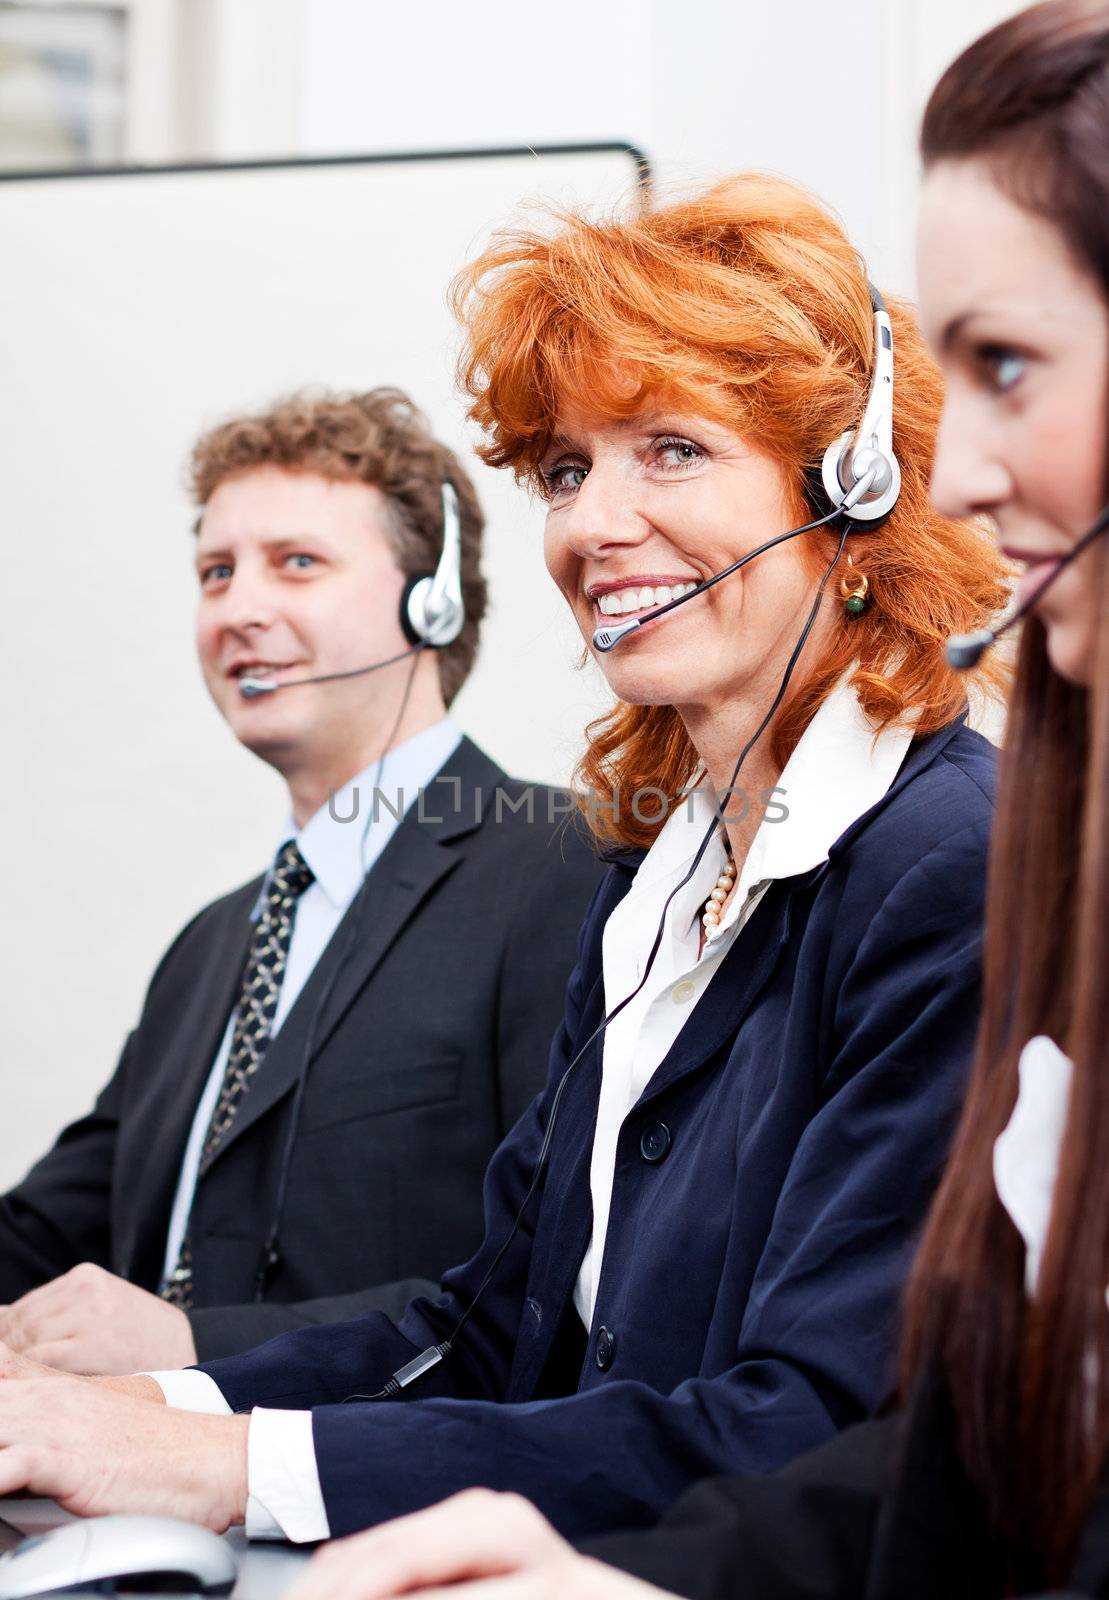 callcenter team business people with headphone at work in office